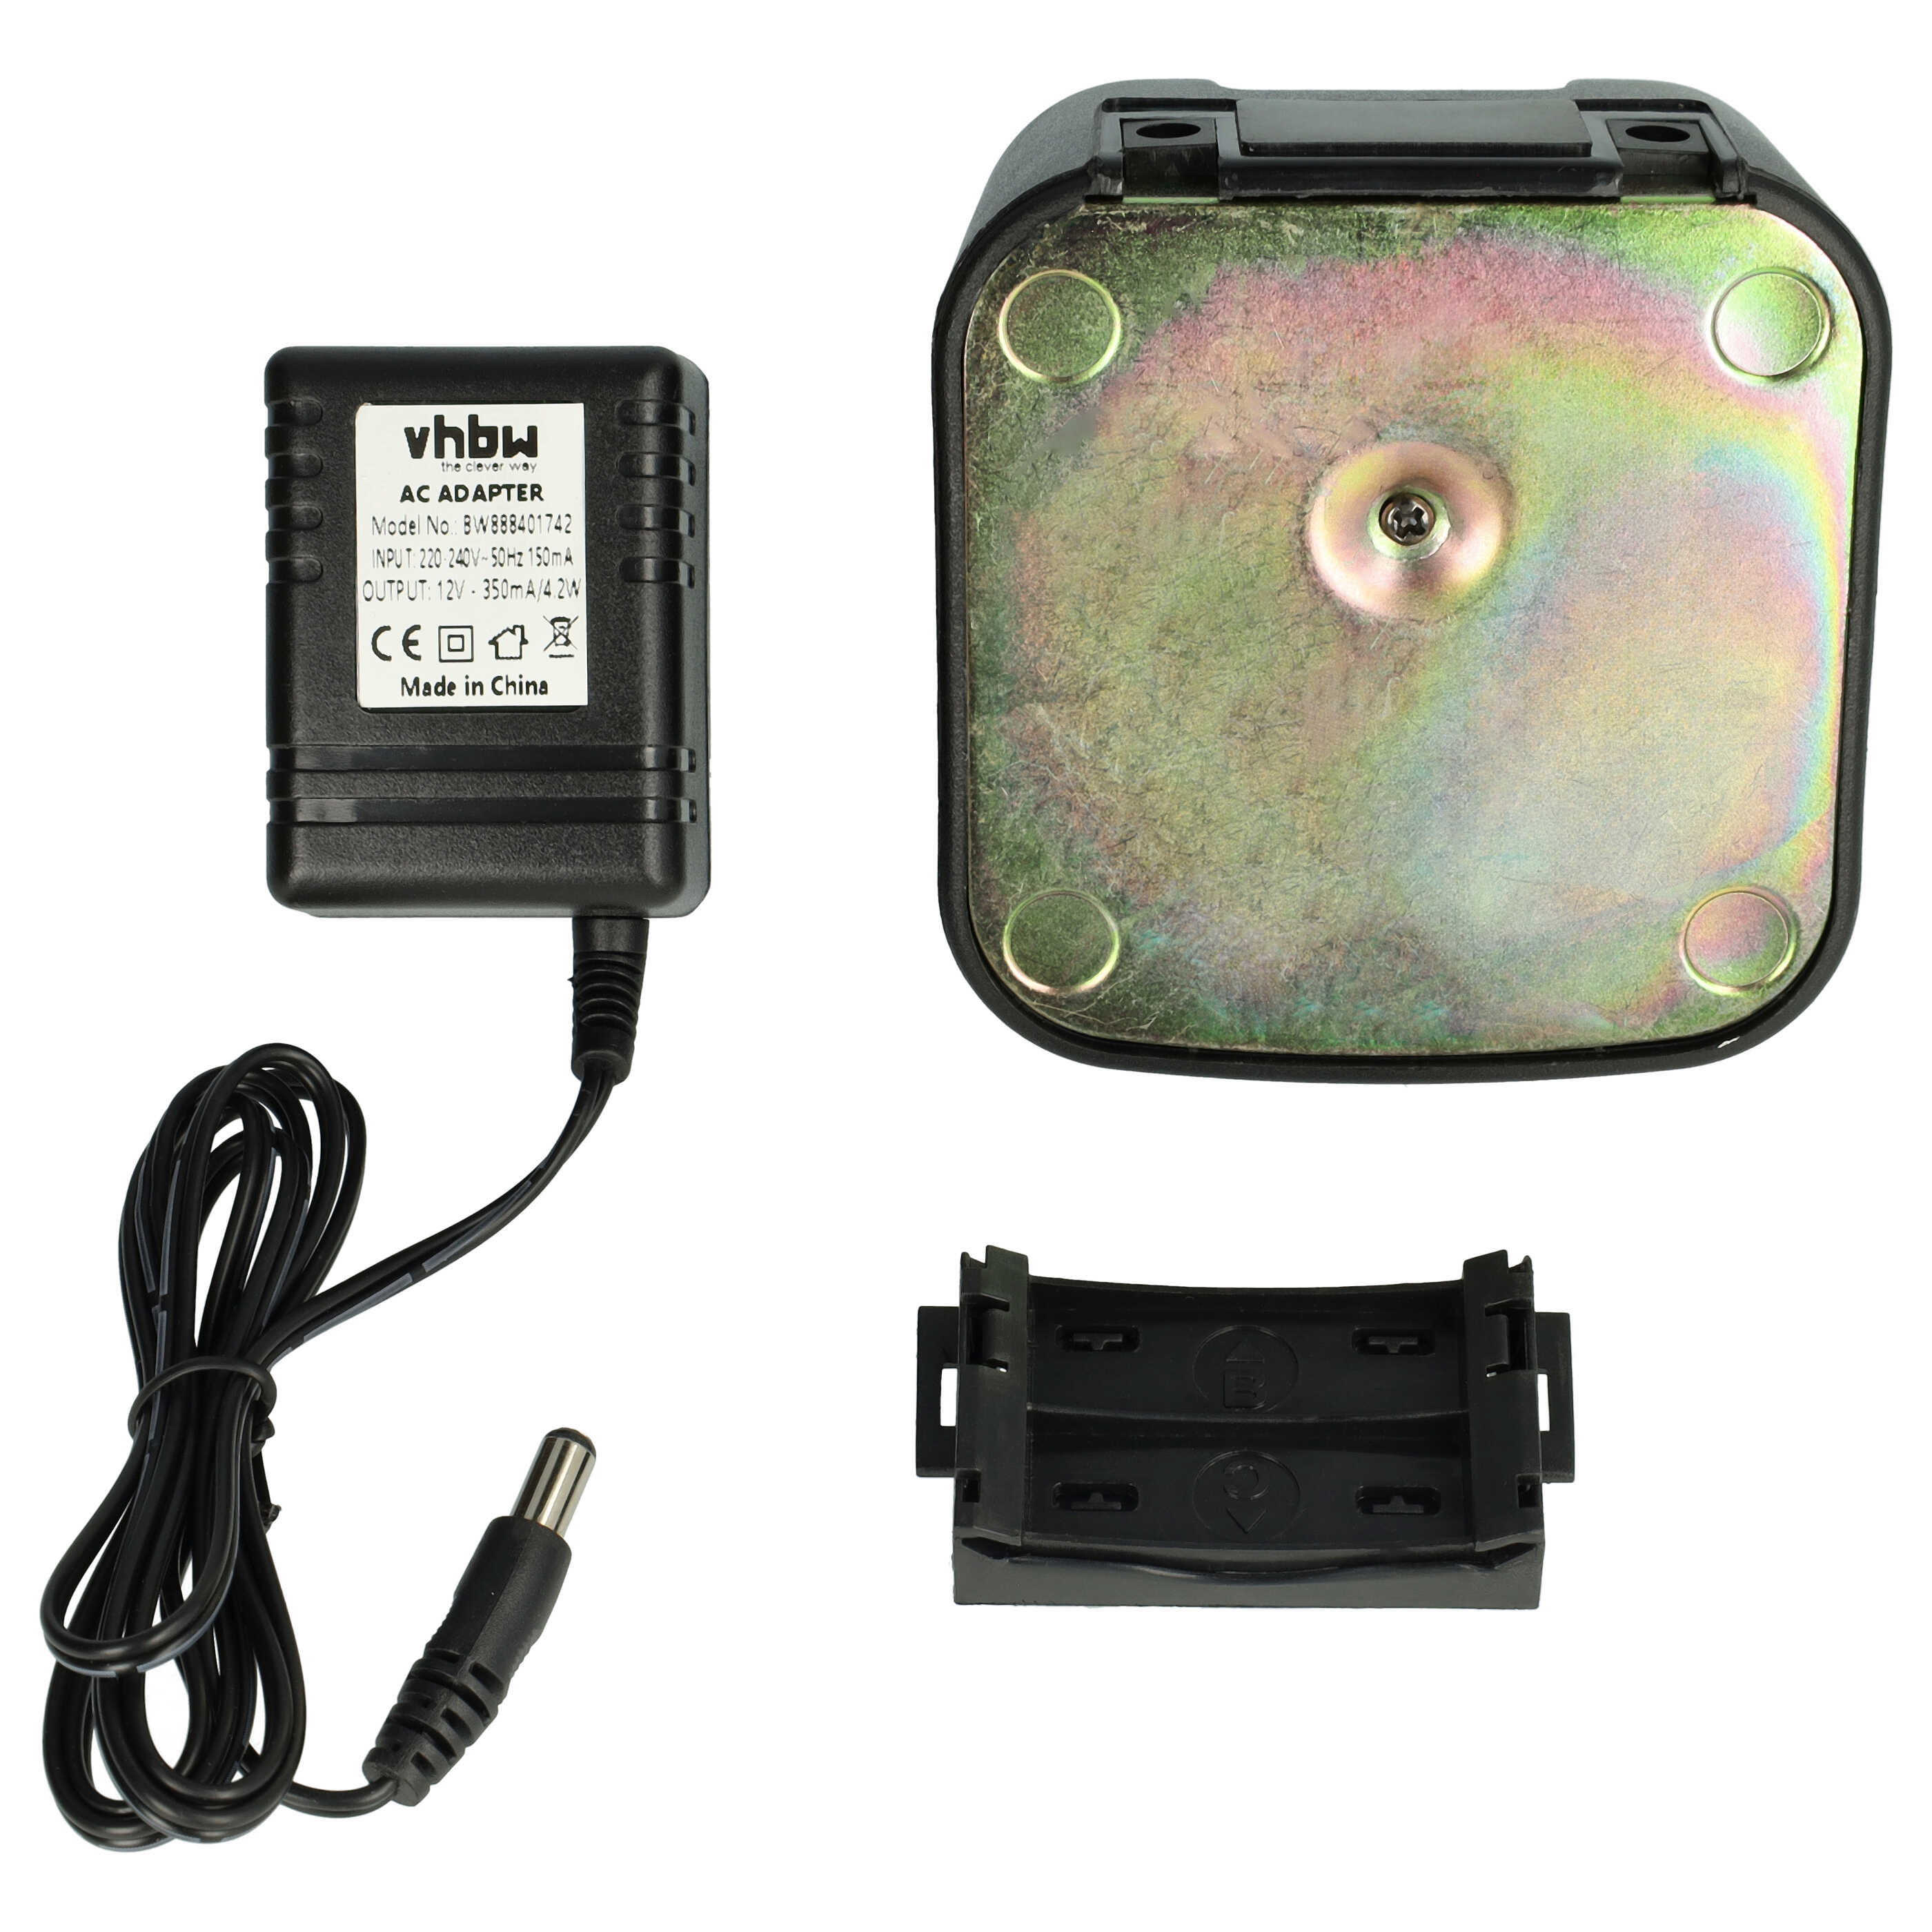 Charger + Mains Adapter Suitable for IC-A24 Radio Batteries - 12.0 V, 0.35 A